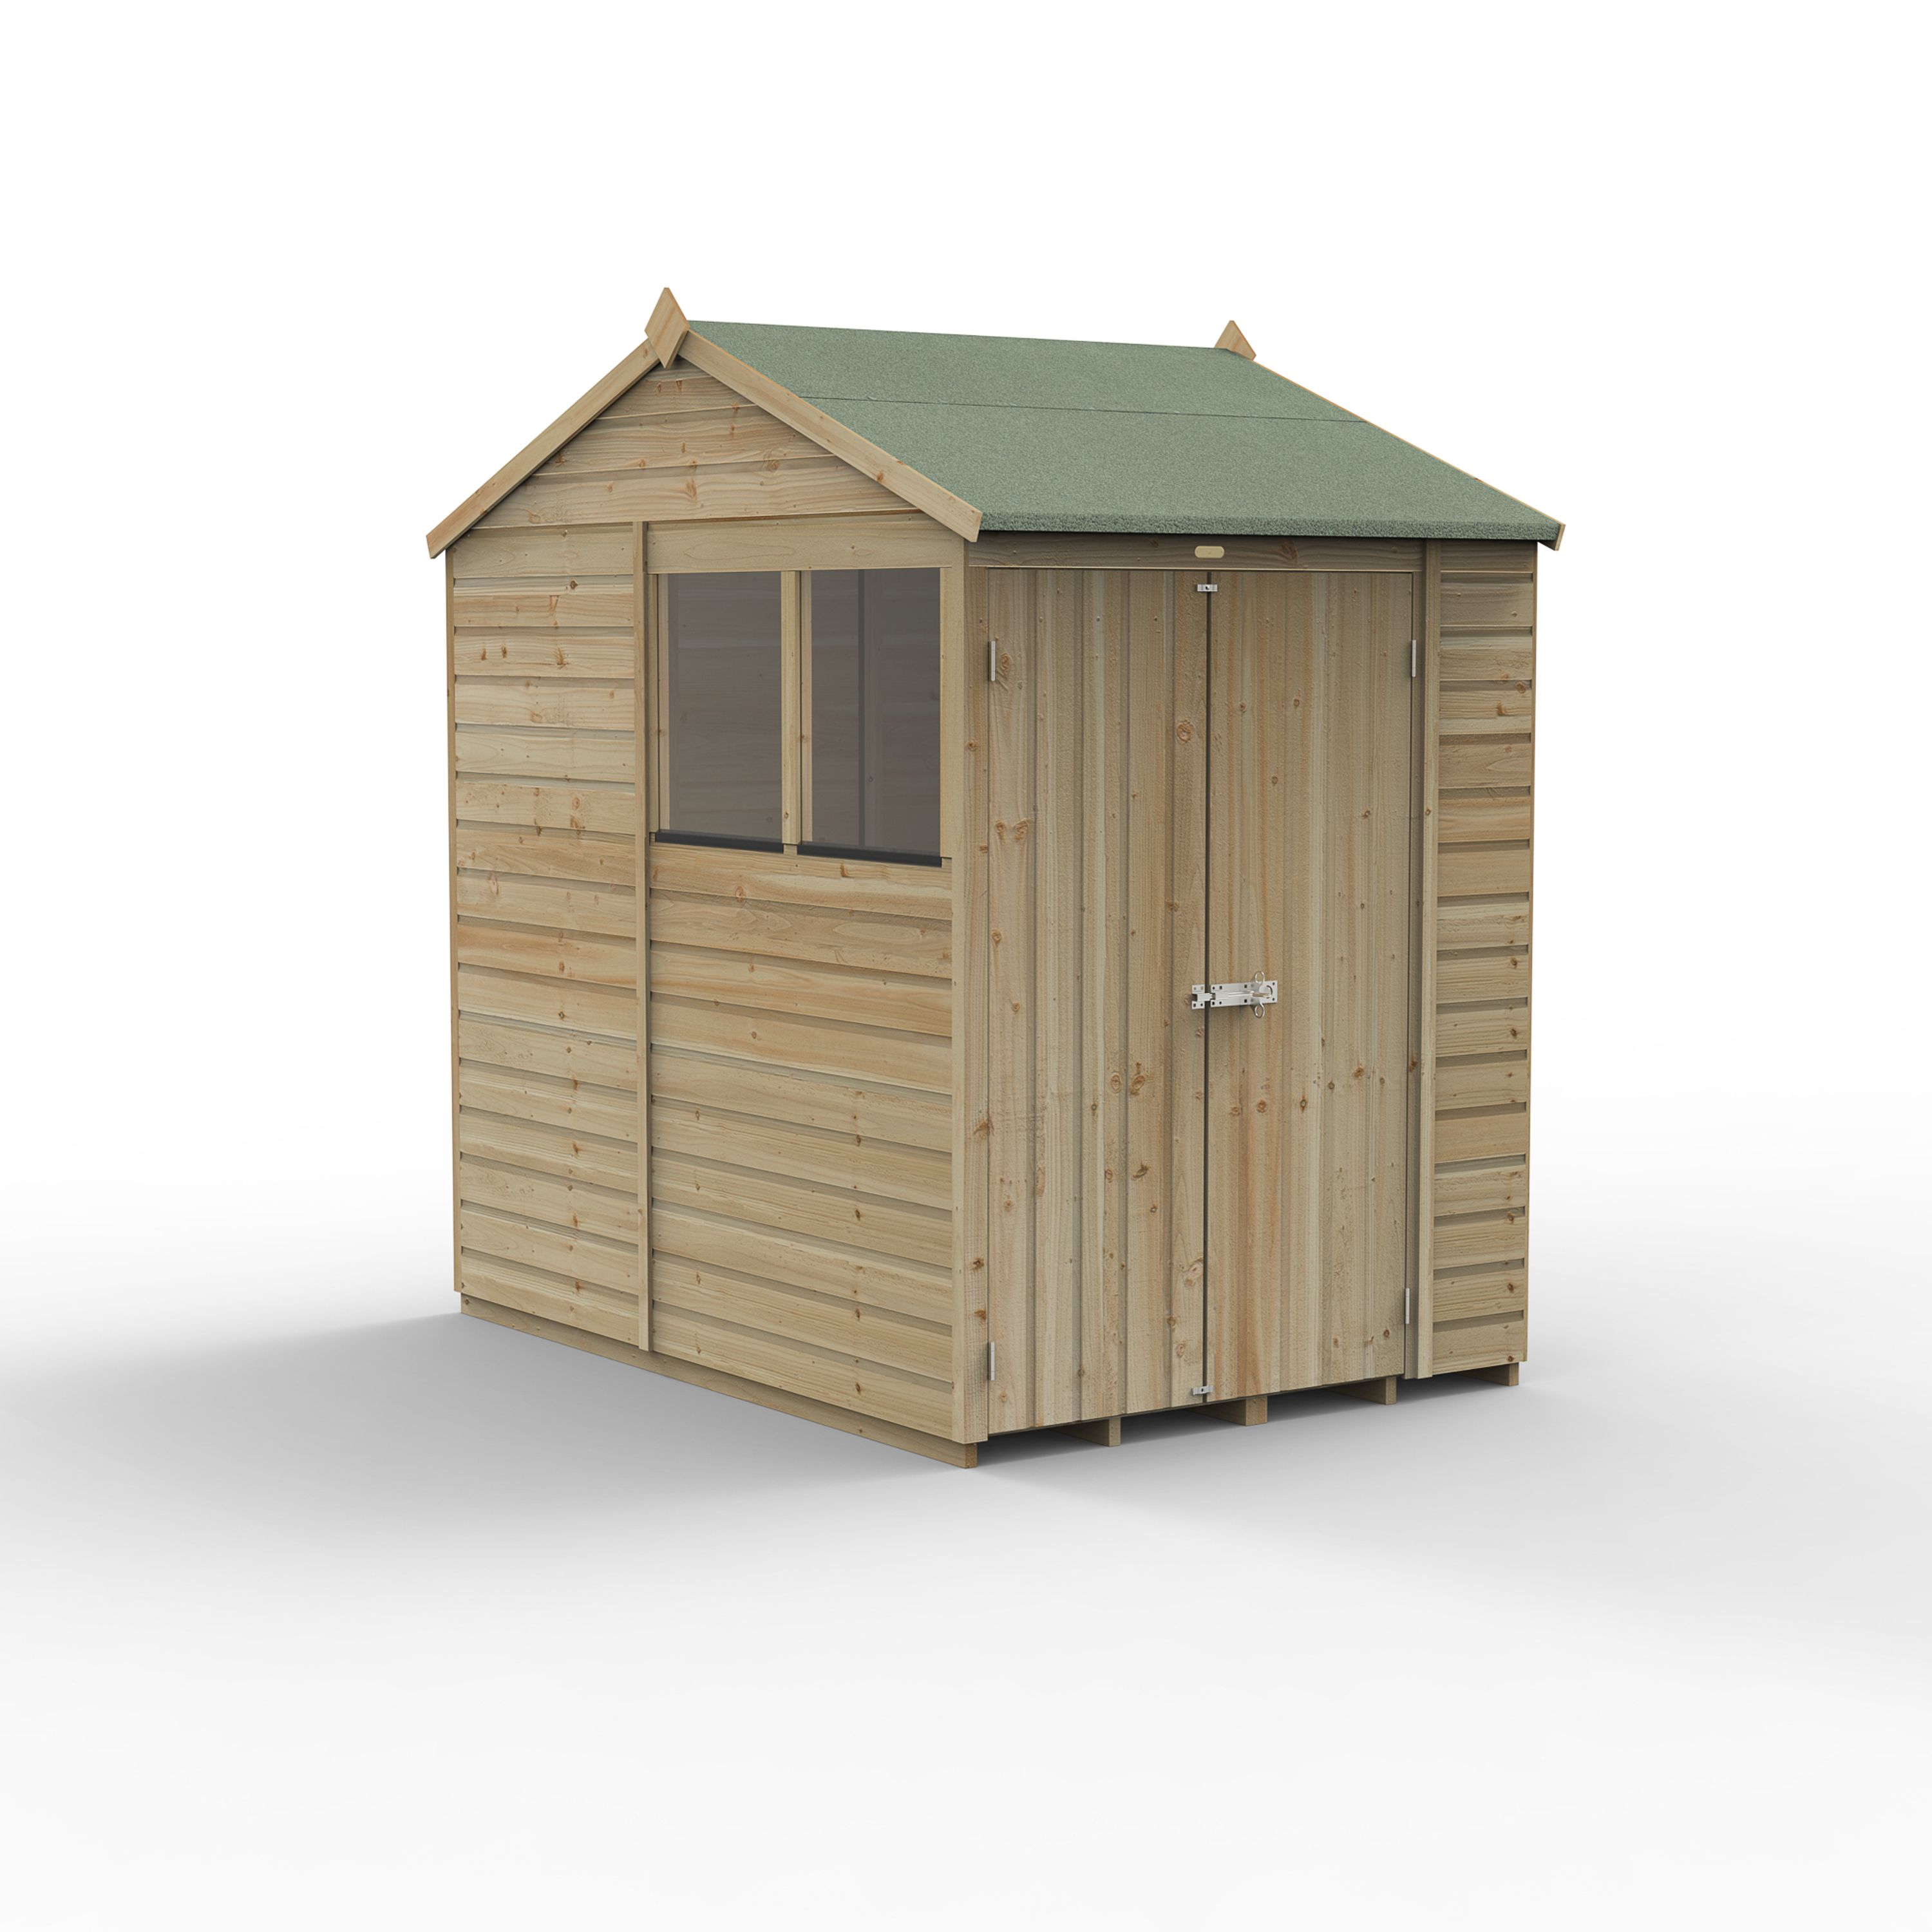 Forest Garden Beckwood 7x5 ft Reverse apex Natural timber Wooden 2 door Shed with floor & 2 windows (Base included) - Assembly not required